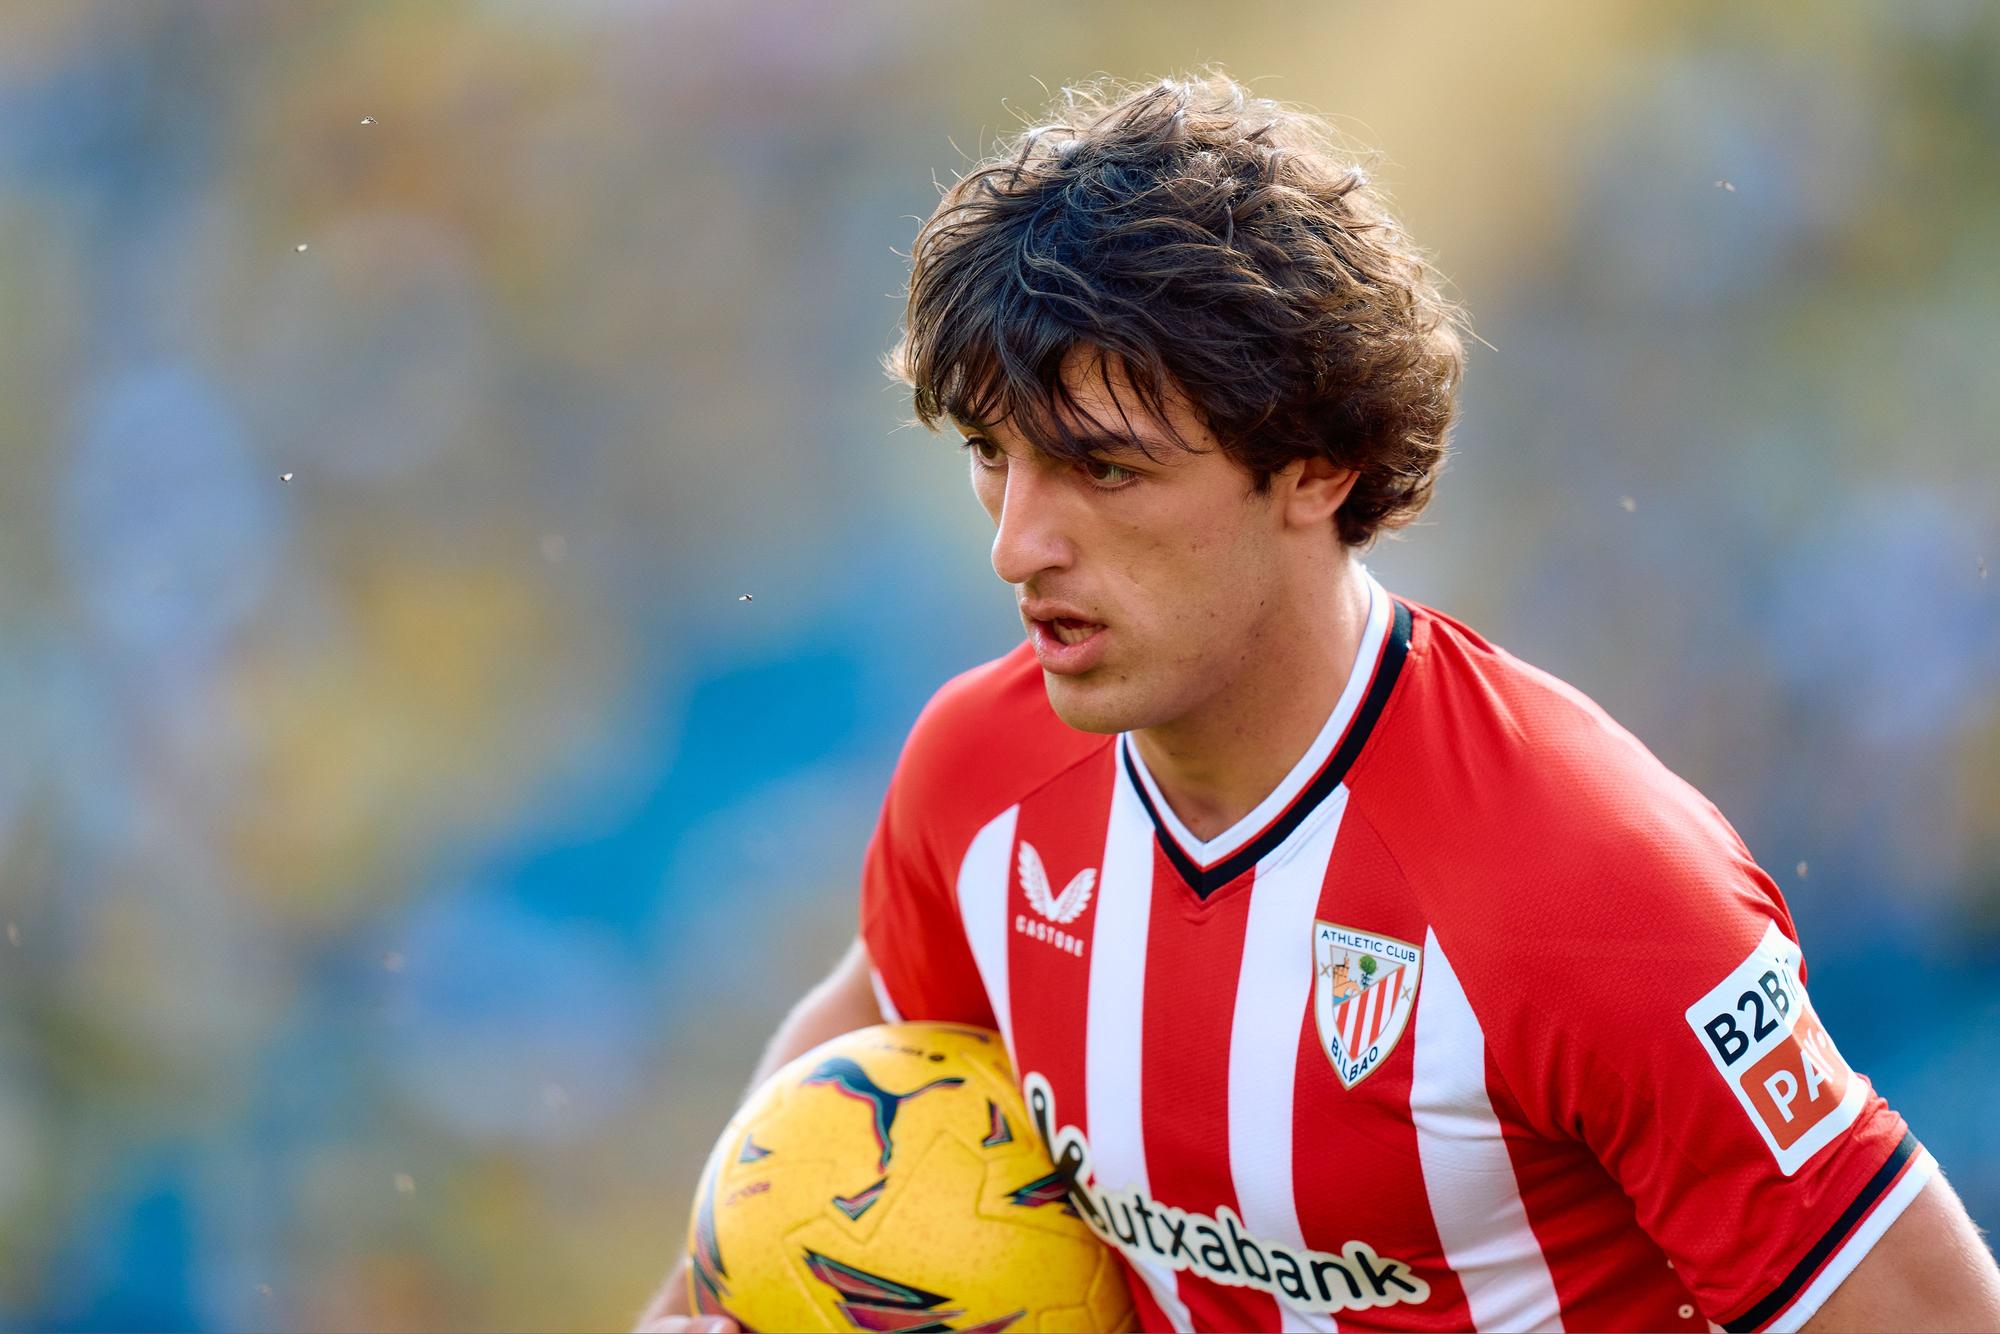 Unai Gomez of Athletic Club in action during the Spanish league, La Liga EA Sports, football match played between UD Las Palmas and Athletic Club at Estadio Gran Canaria on March 10, 2024, in Las Palmas de Gran Canaria, Spain. AFP7 10/03/2024 ONLY FOR USE IN SPAIN / Gabriel Jimenez / AFP7 / Europa Press;2024;SOCCER;Sport;ZSOCCER;ZSPORT;UD Las Palmas v Athletic Club - La Liga EA Sports;